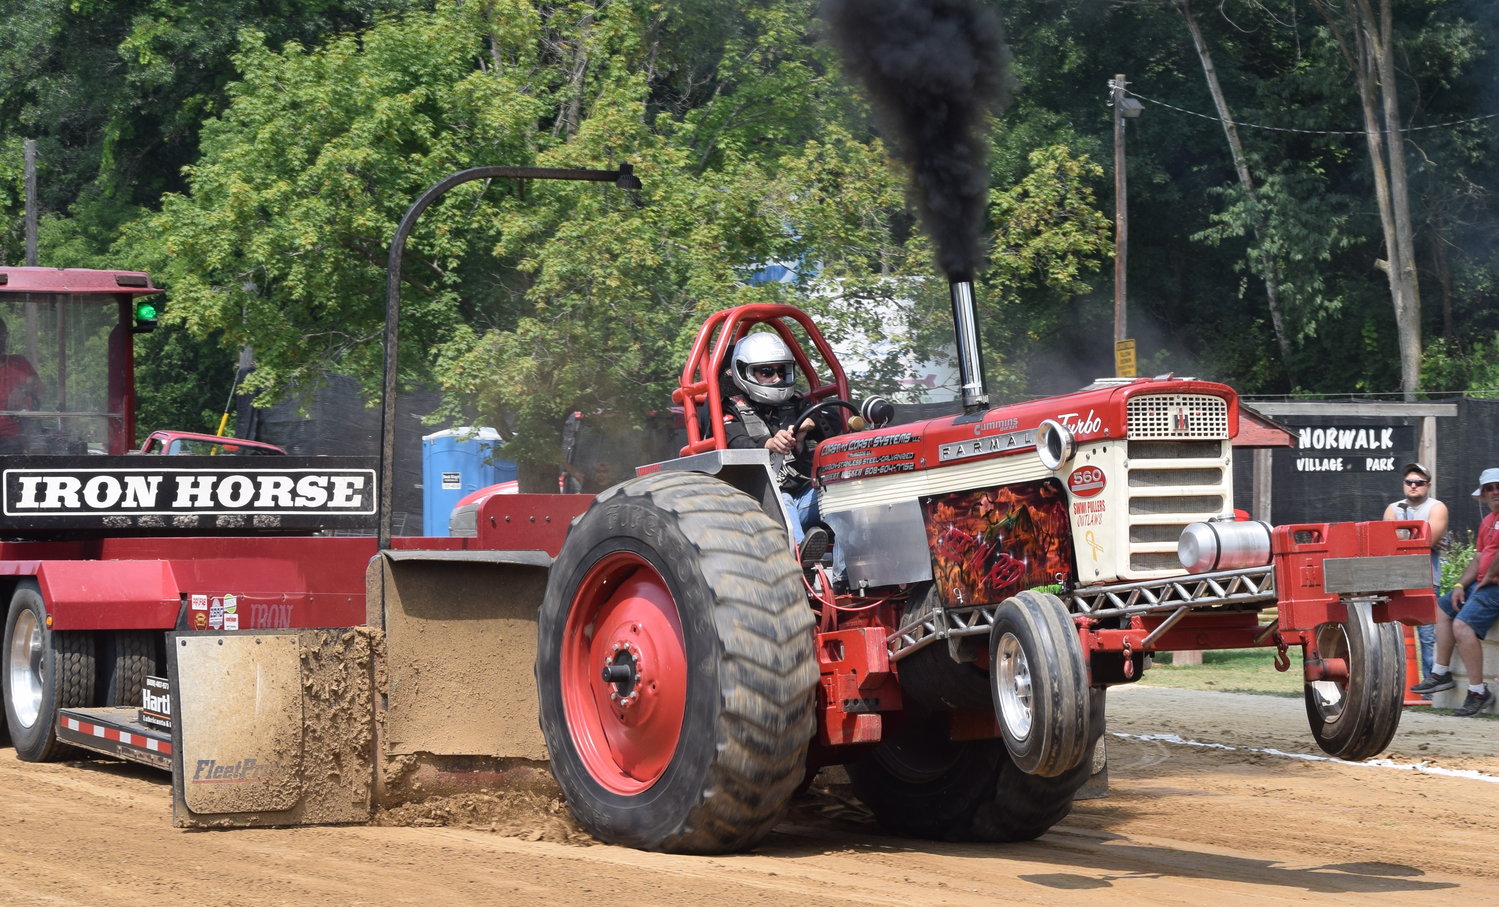 Dave Madison of Mt. Tabor had a nice pull in the Outlaw class at the 53rd Annual Norwalk Tractor Pull in 2018.